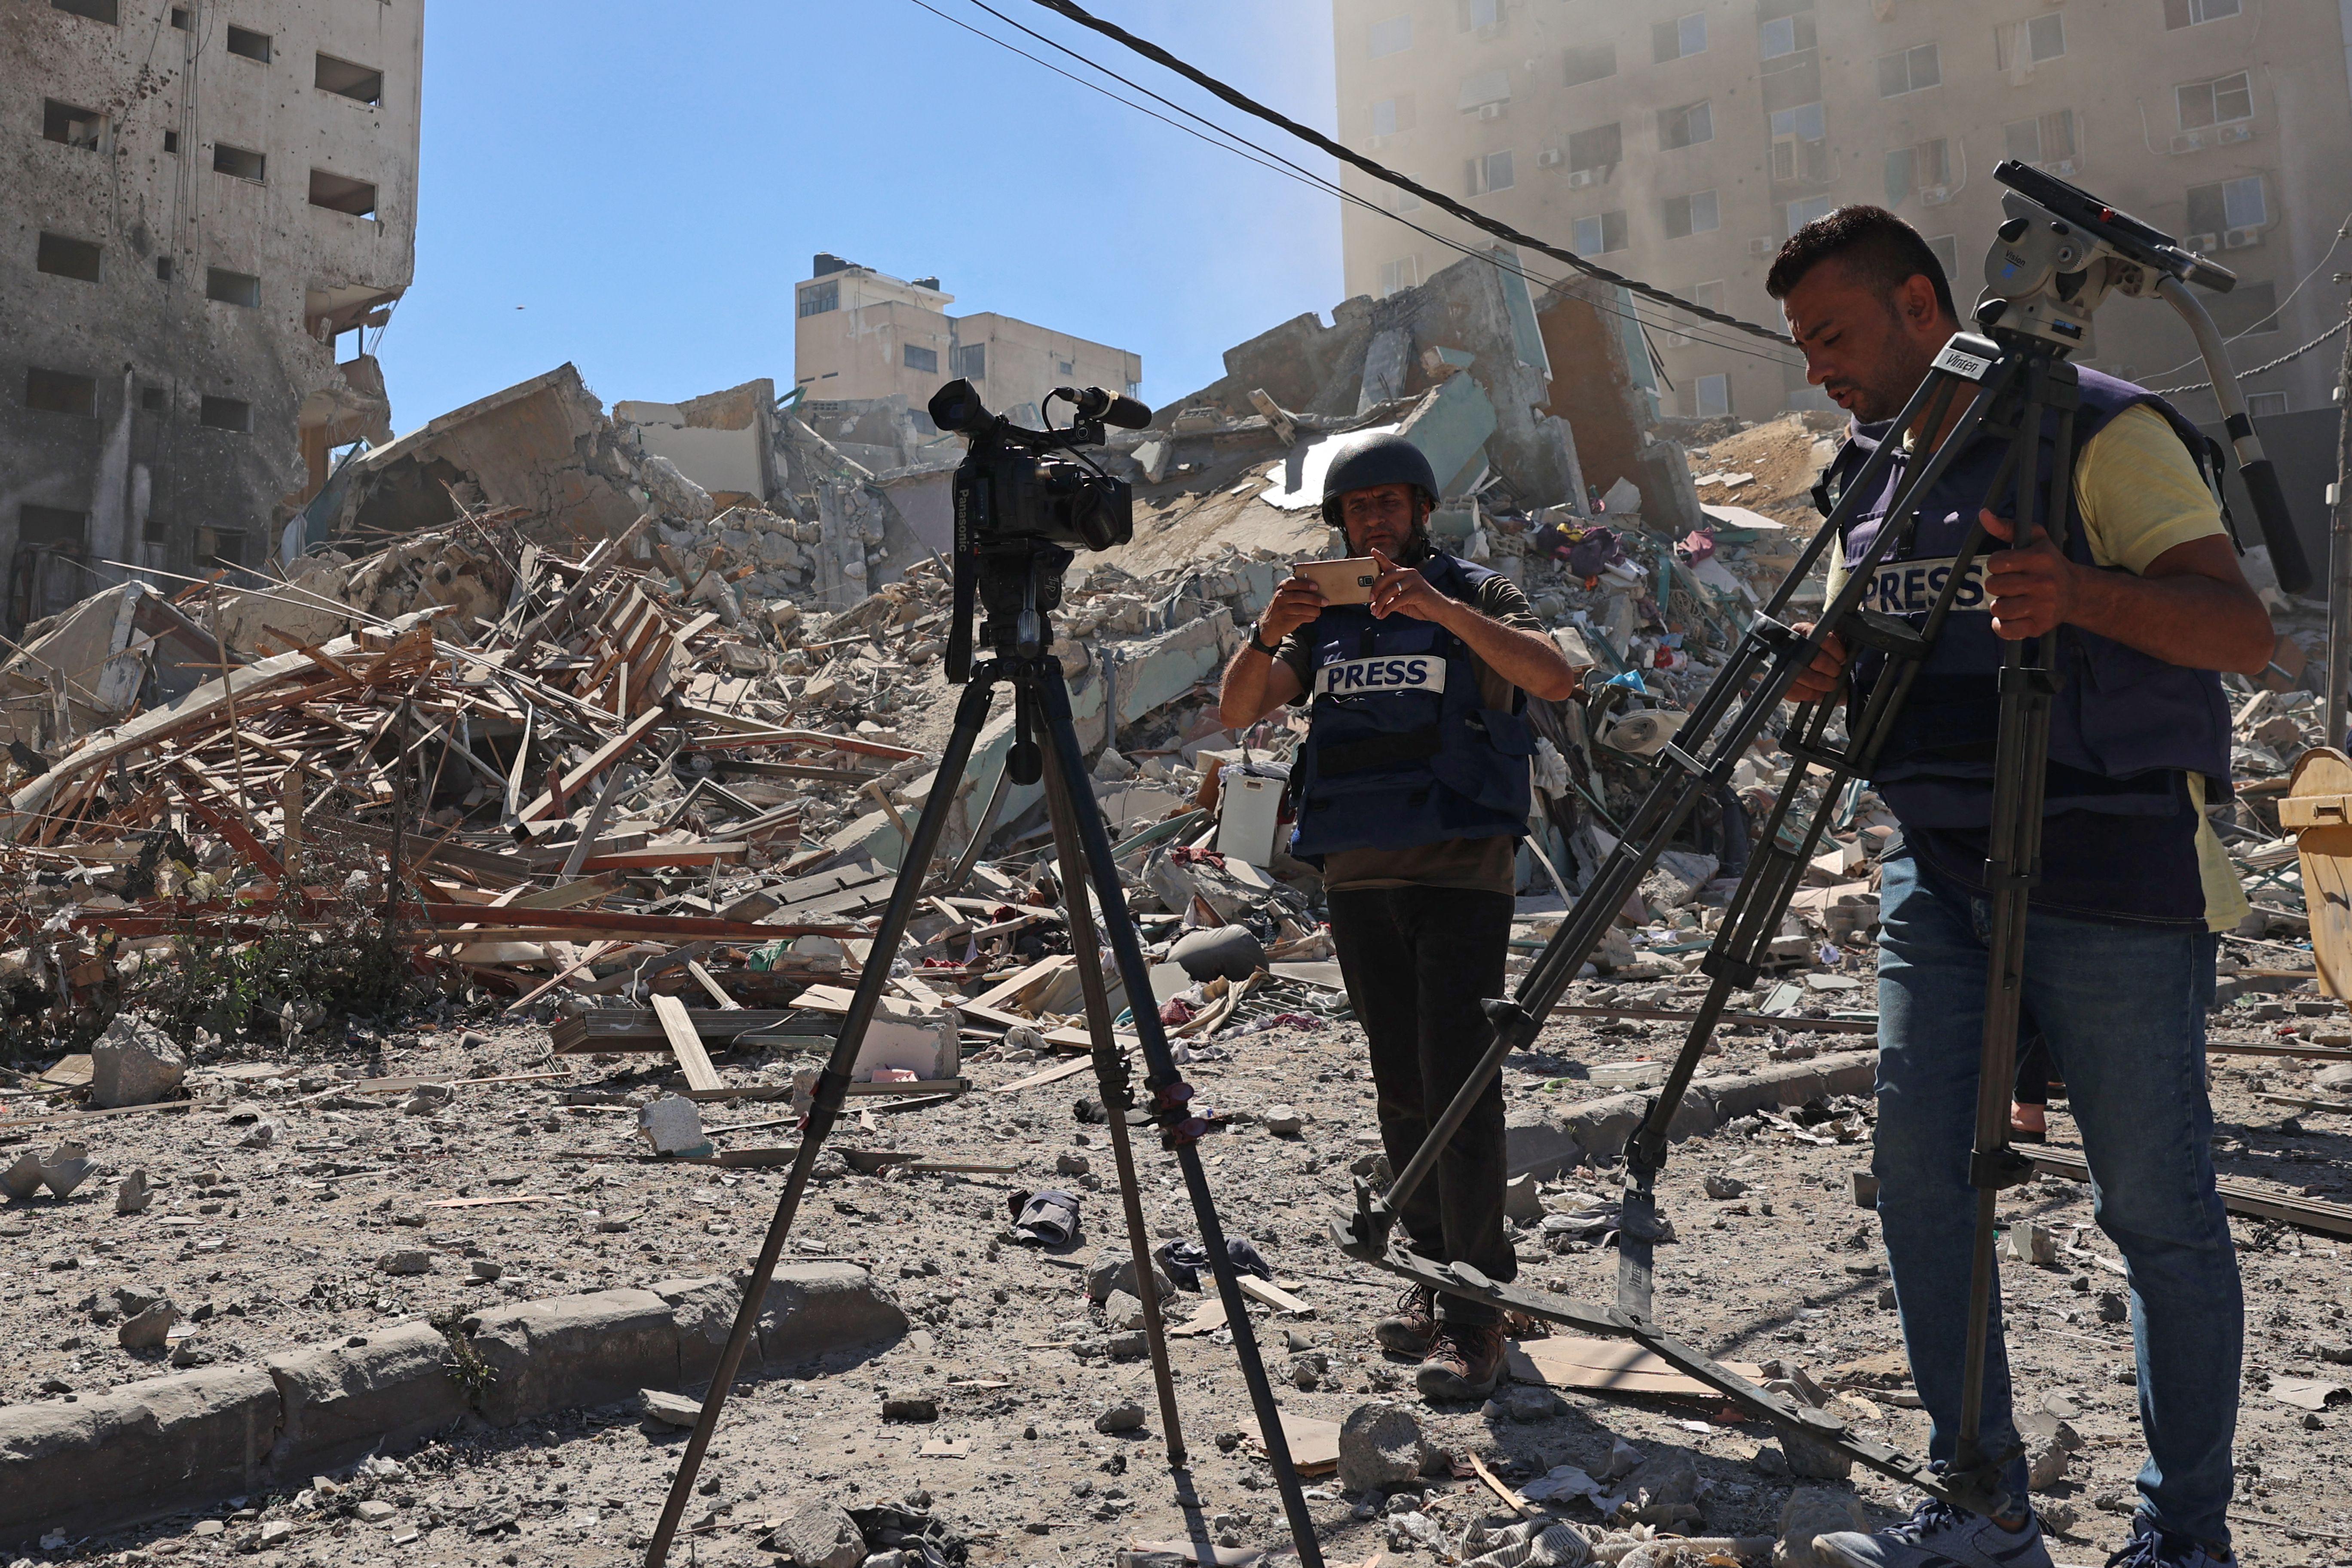 Journalists stand next to the rubble of Jala Tower, which housed international press offices, following an Israeli airstrike in the Gaza Strip on May 15, 2021.